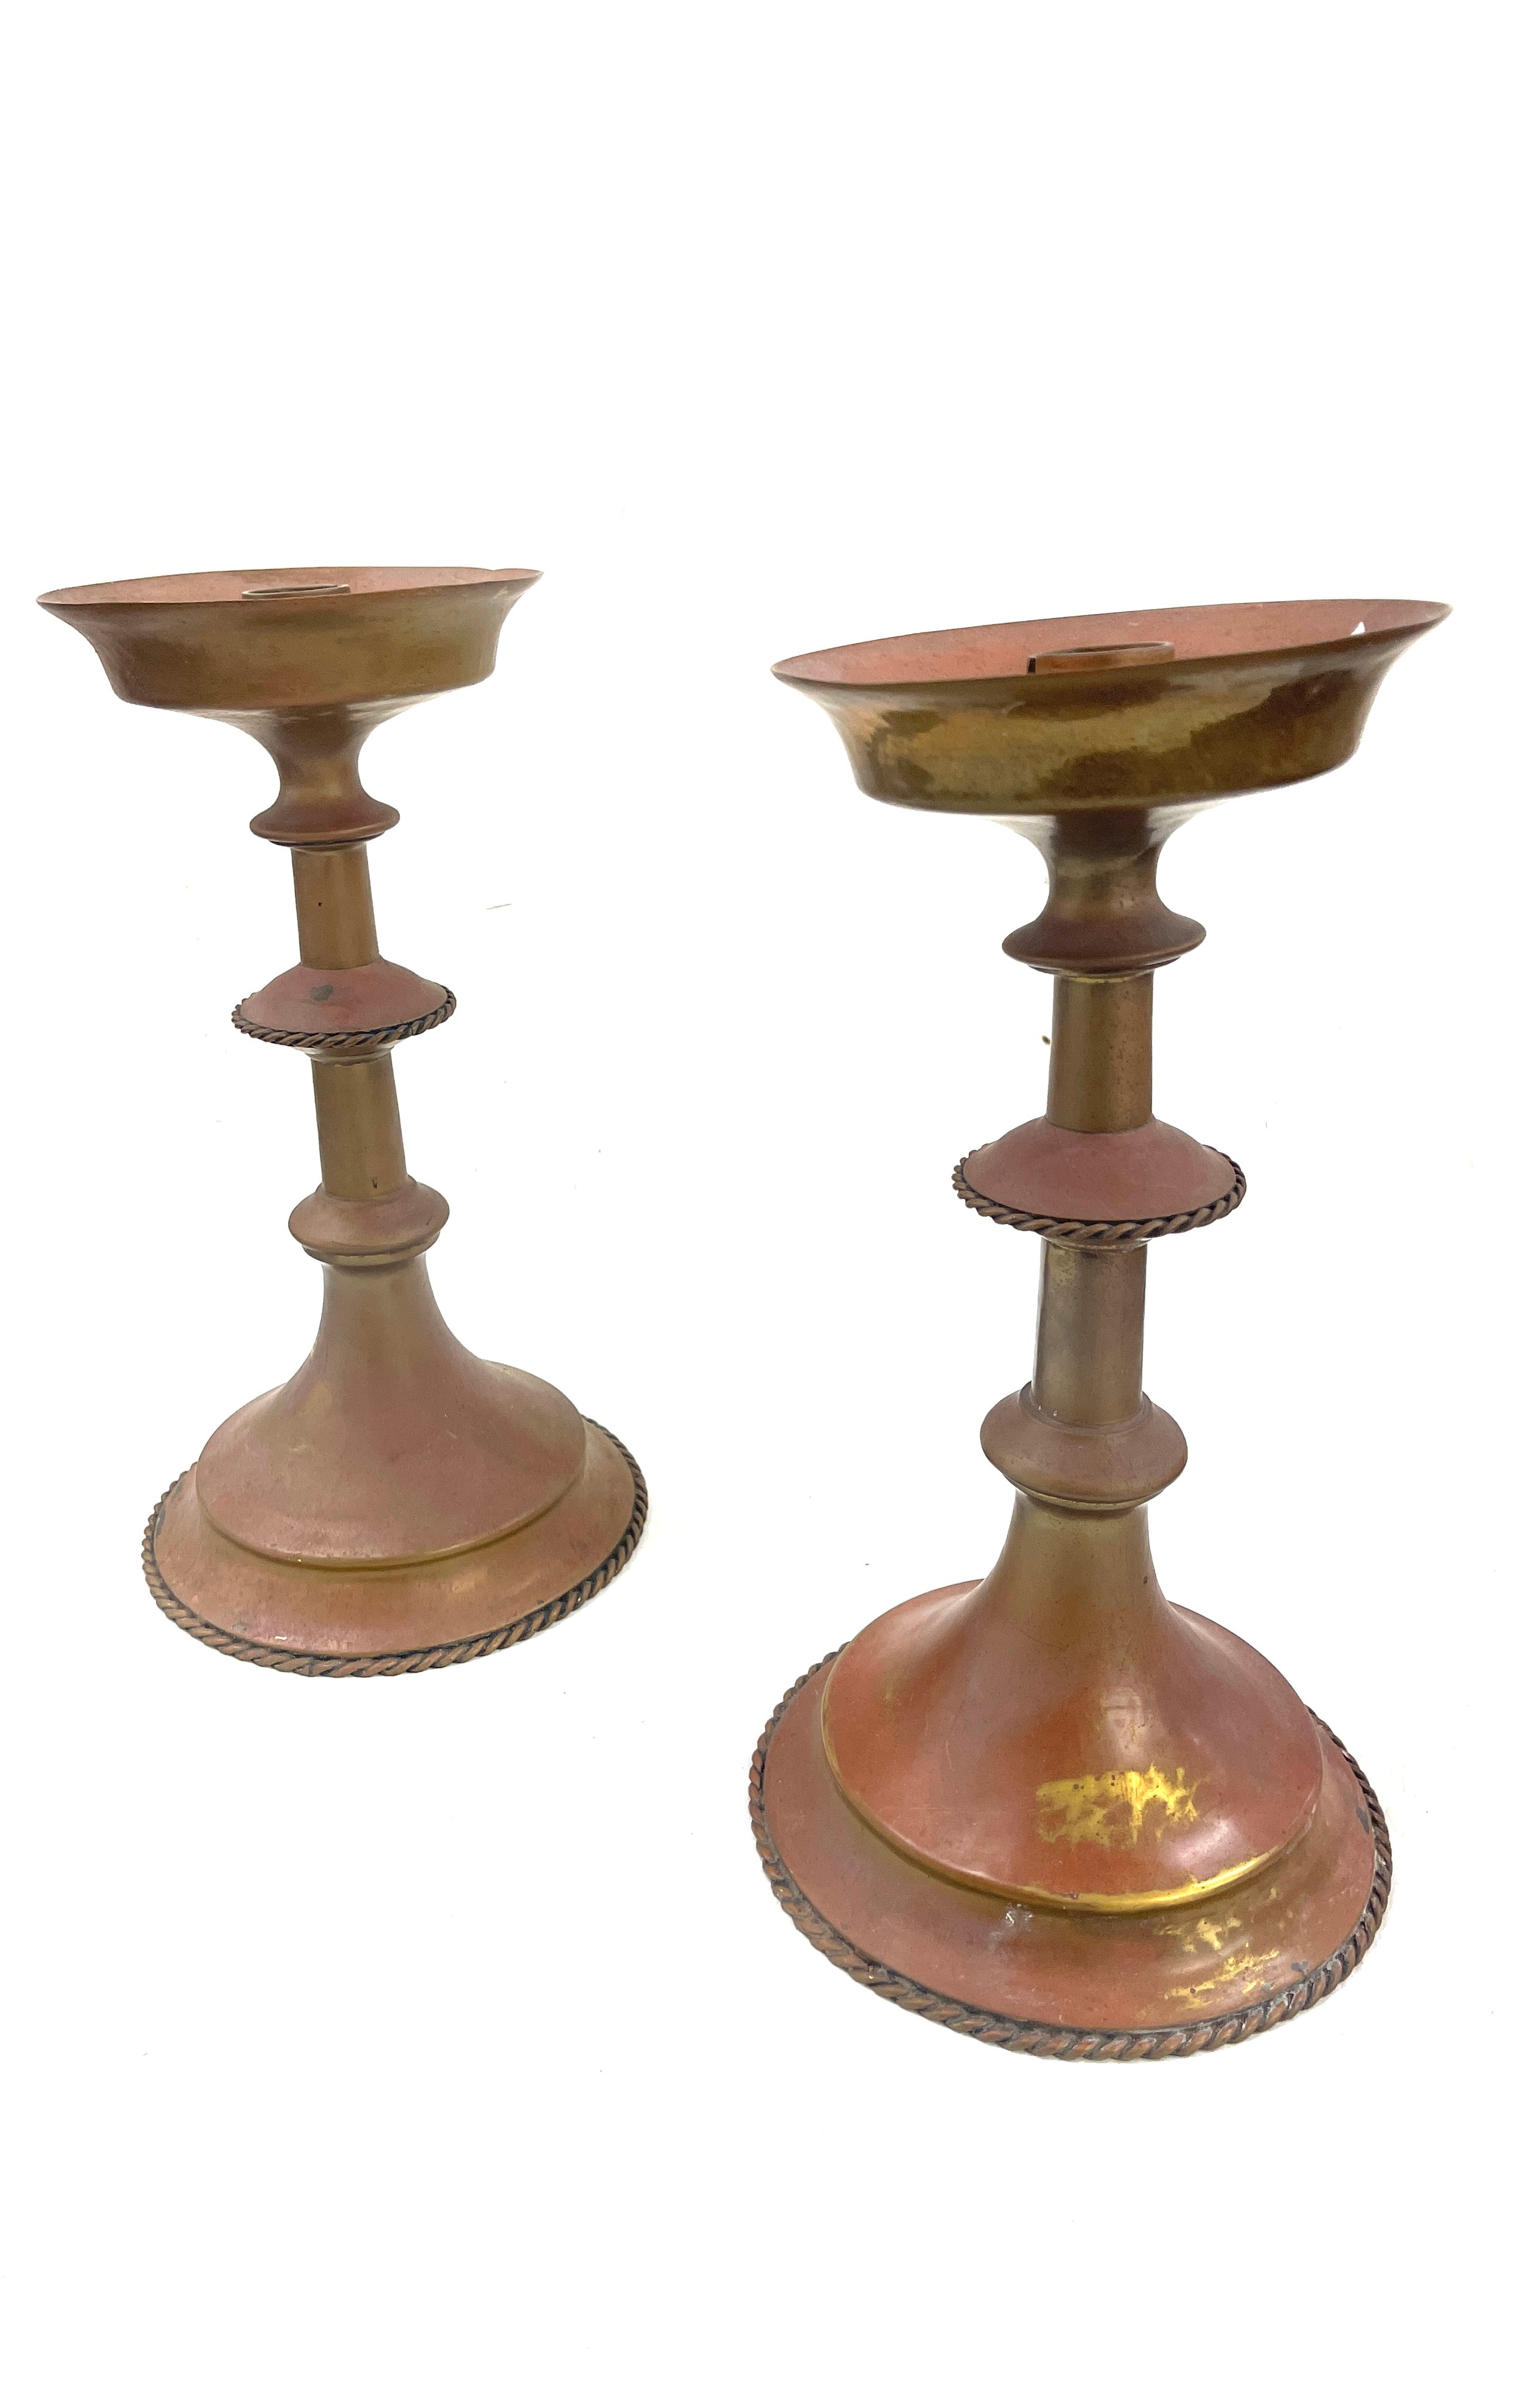 Pair of church brass candlestick holders measures approx